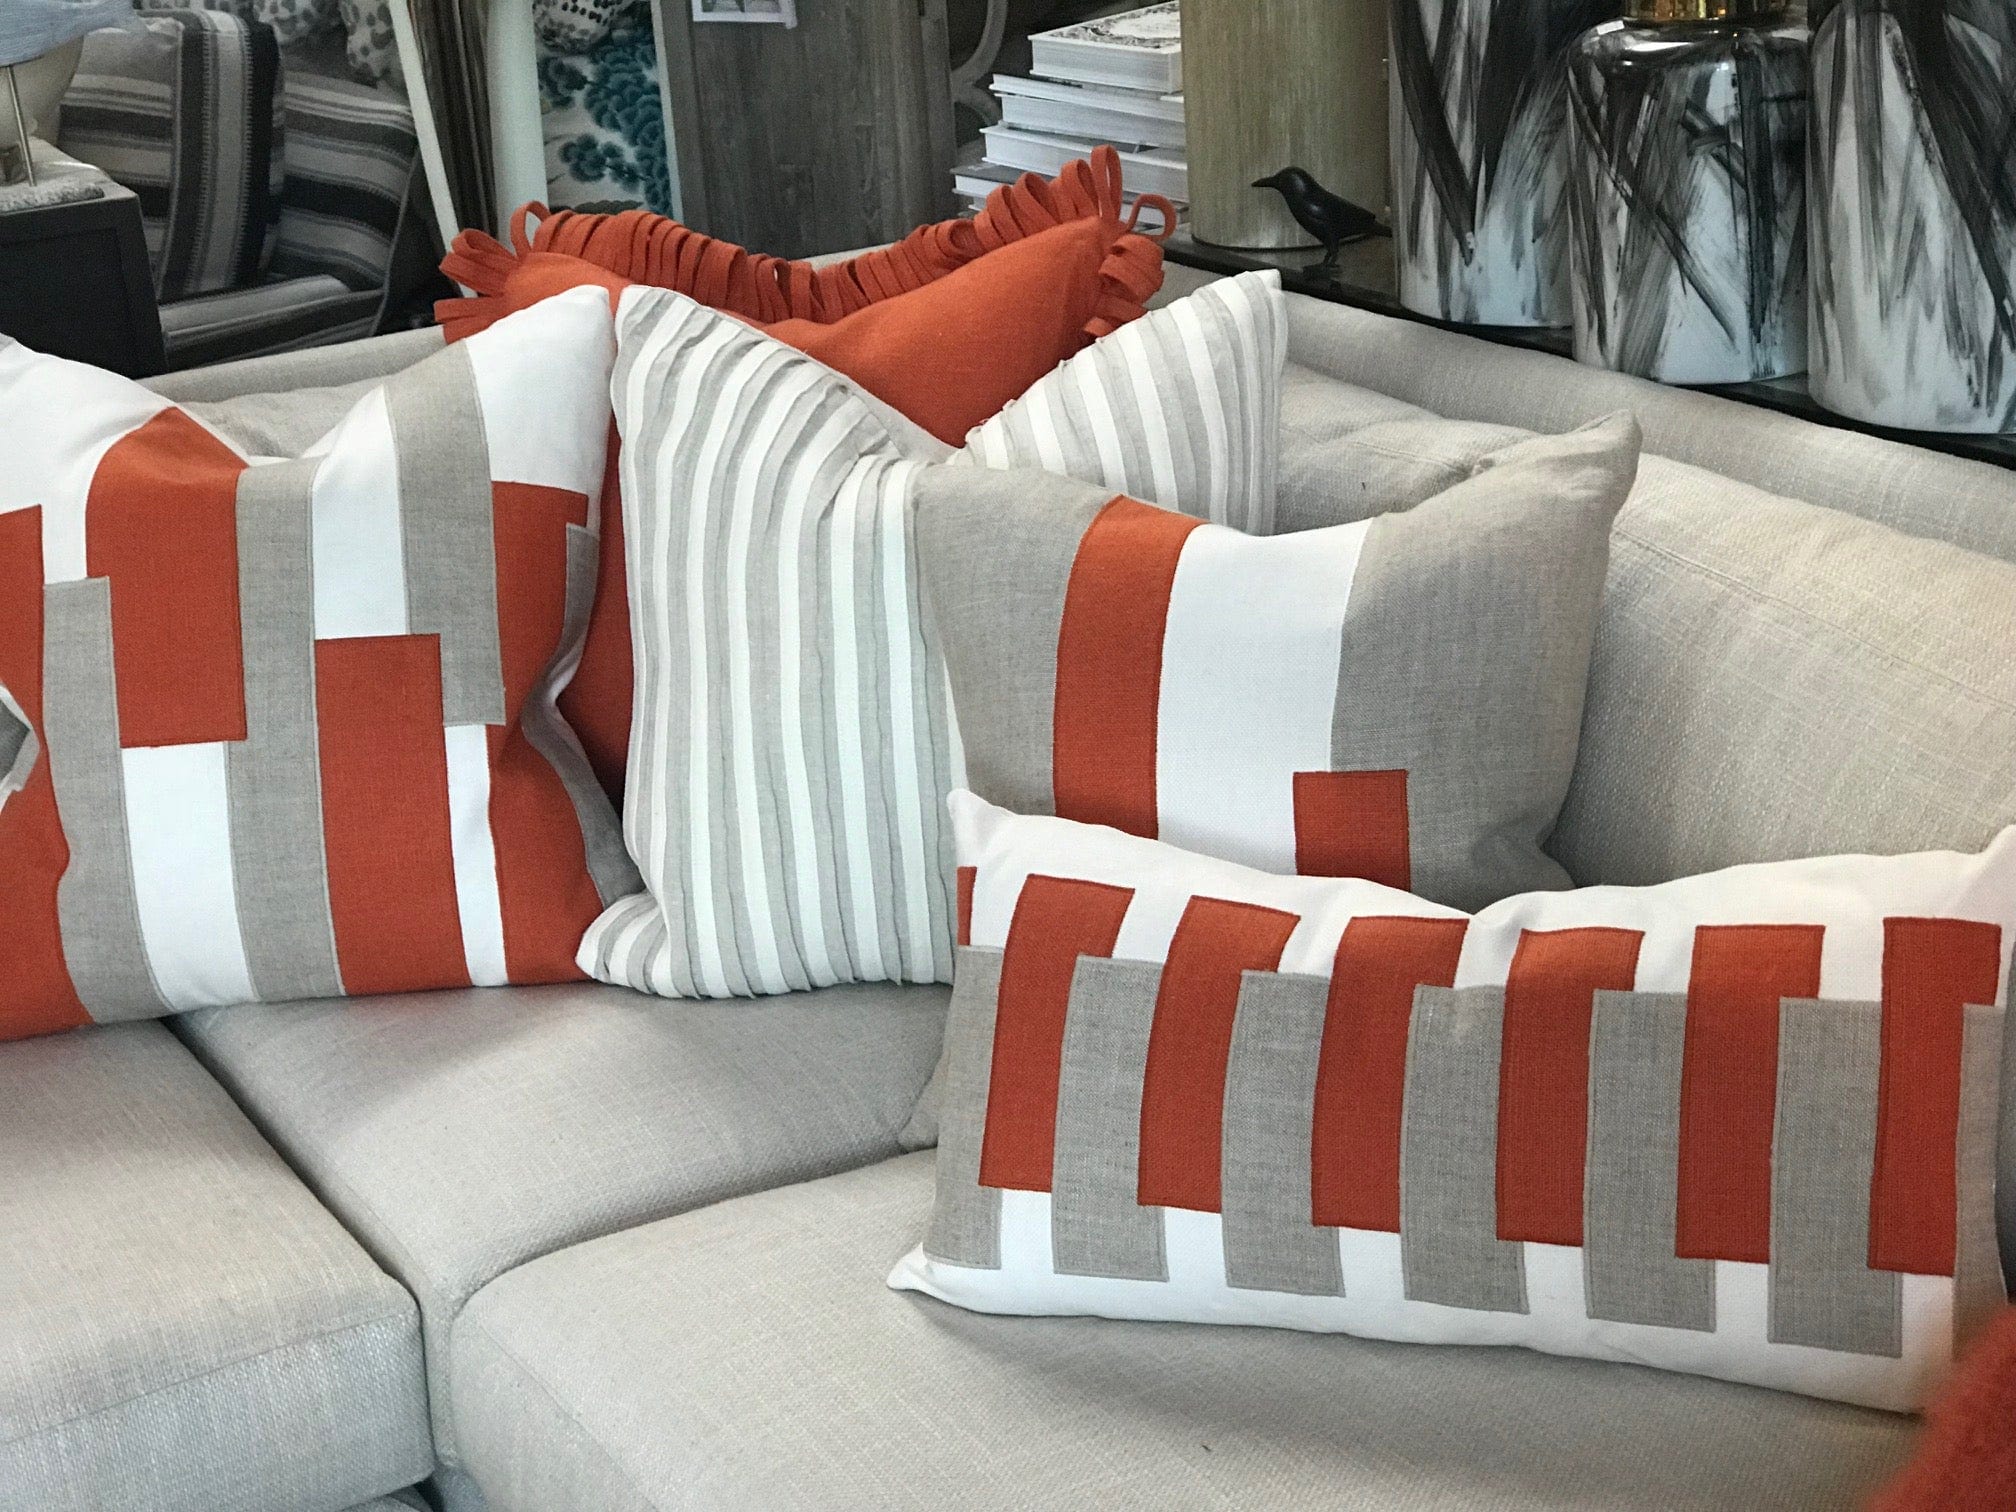 large couch pillows 22x22